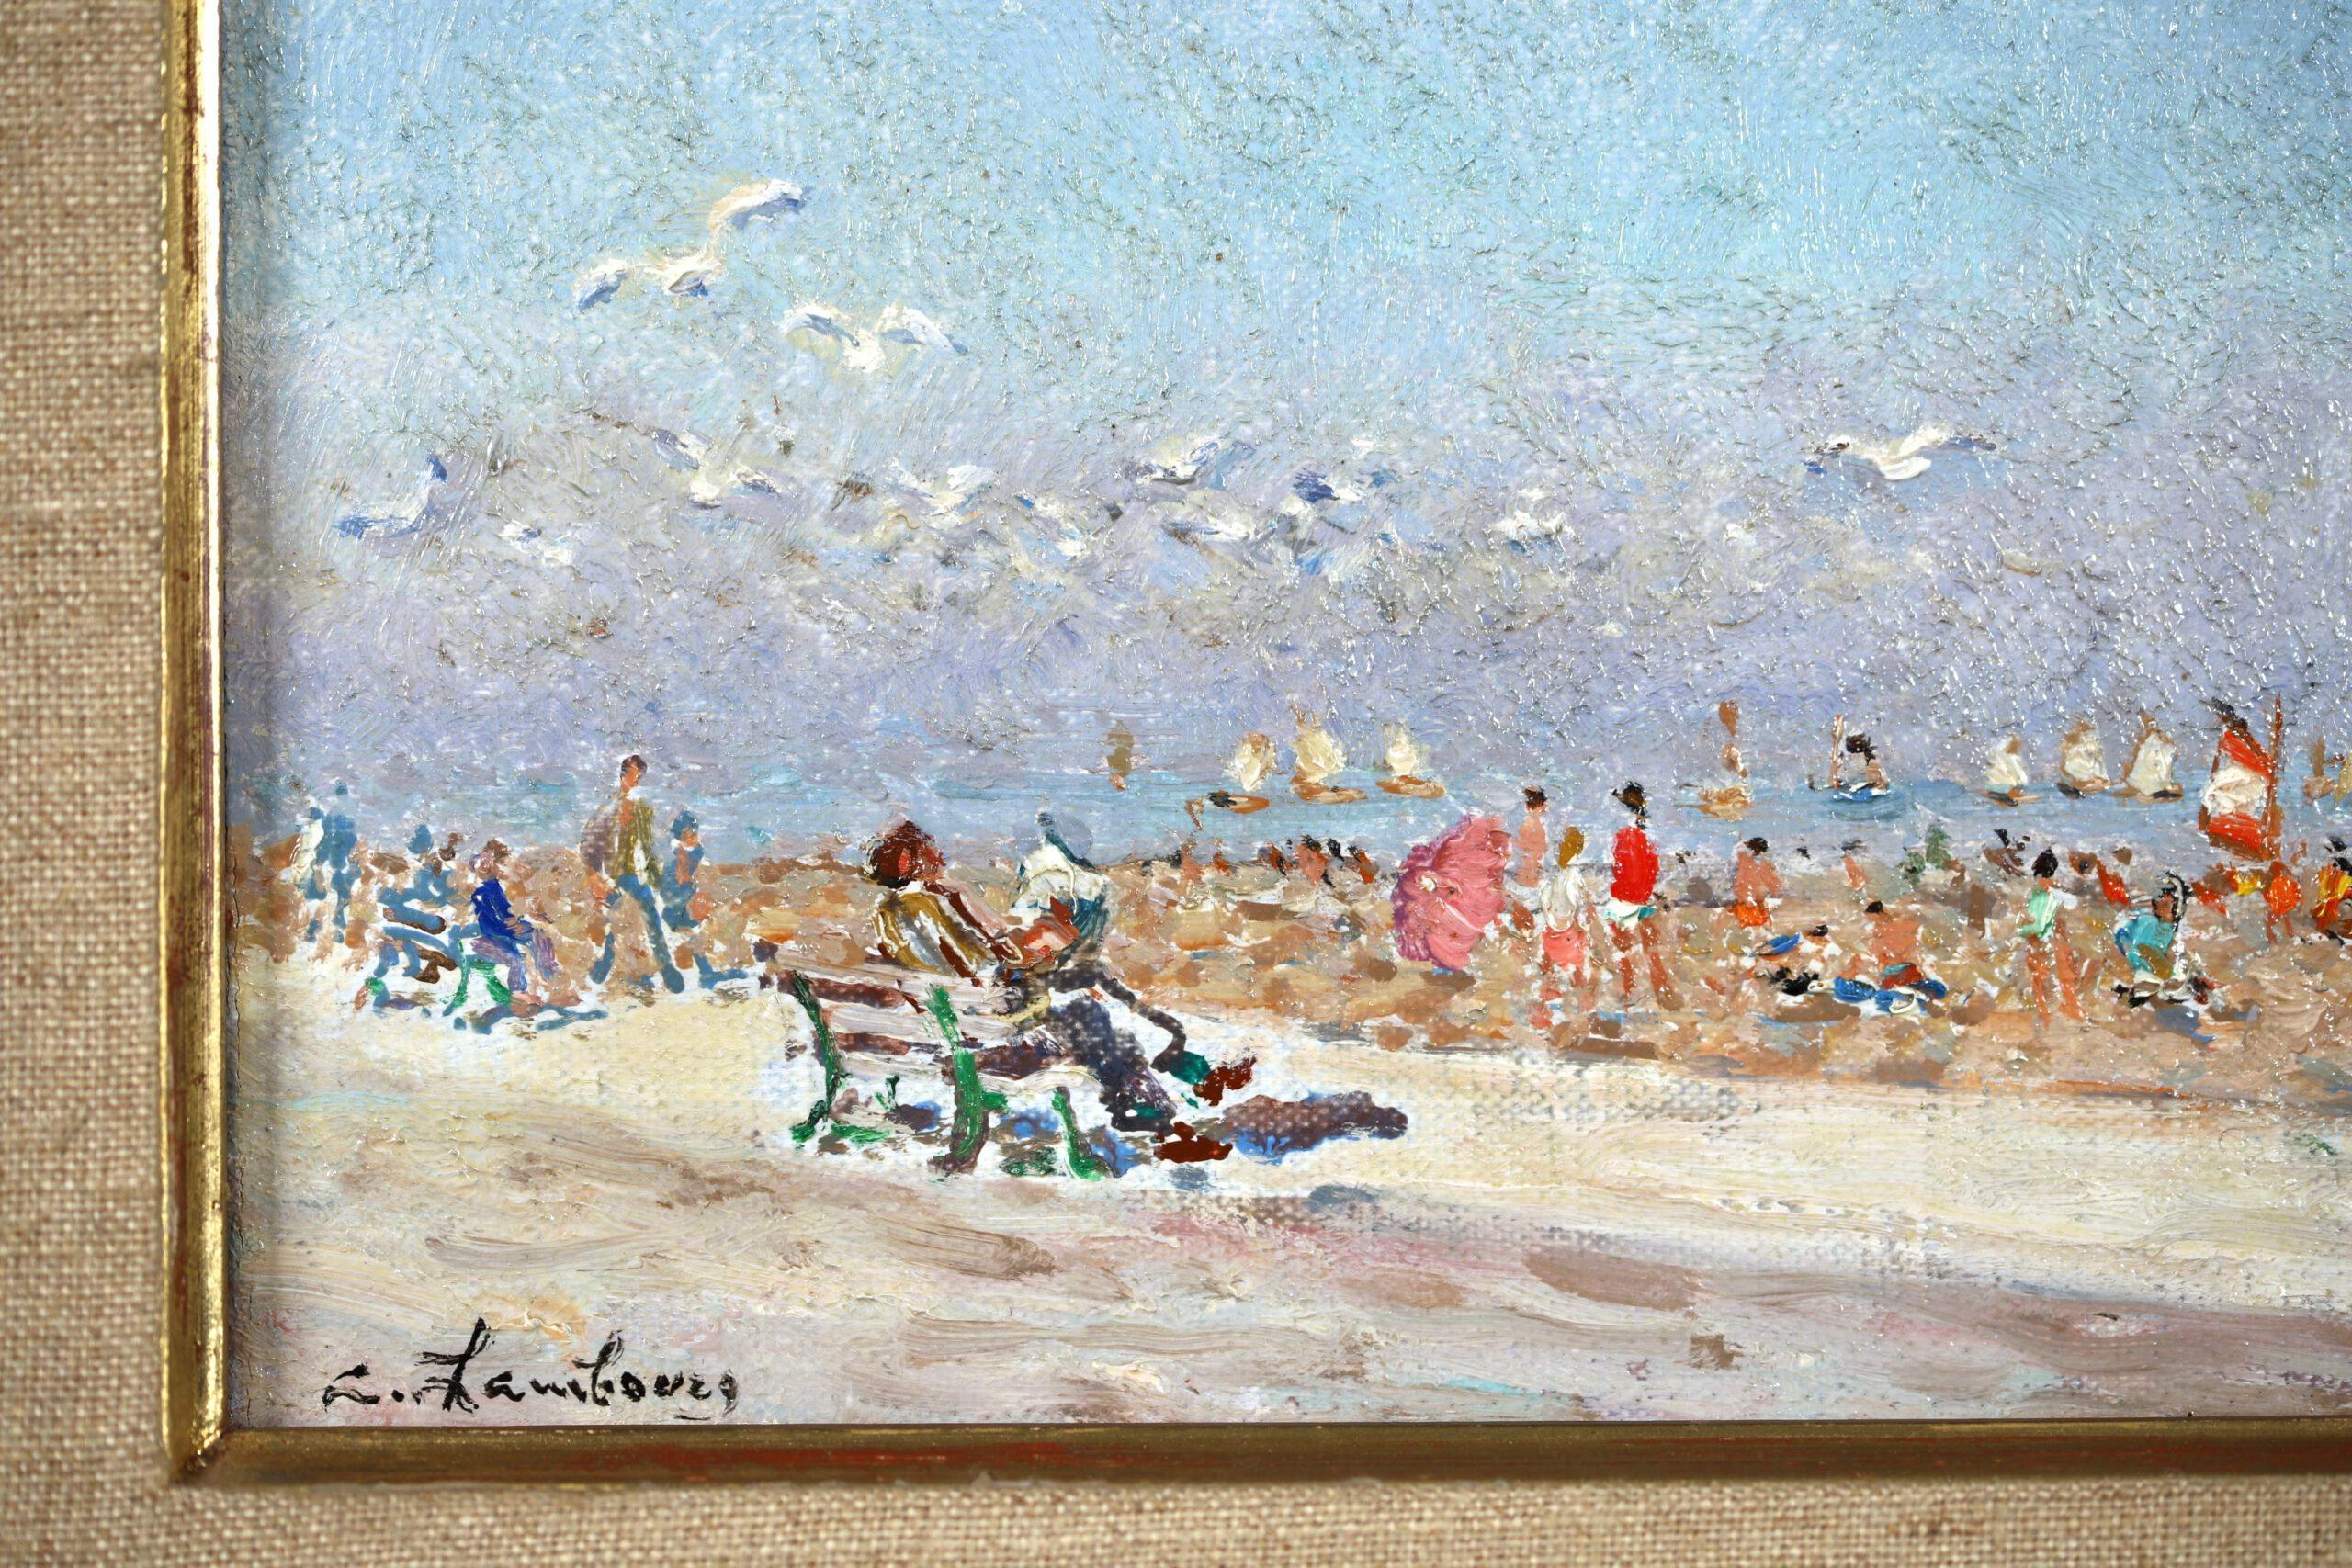 Signed figures in landscape oil on canvas circa 1980 by French modernist painter Andre Hambourg. This beautiful piece depicts families enjoying a day out at the seaside in the height of summer - bathers rest on the golden sand of the beach in